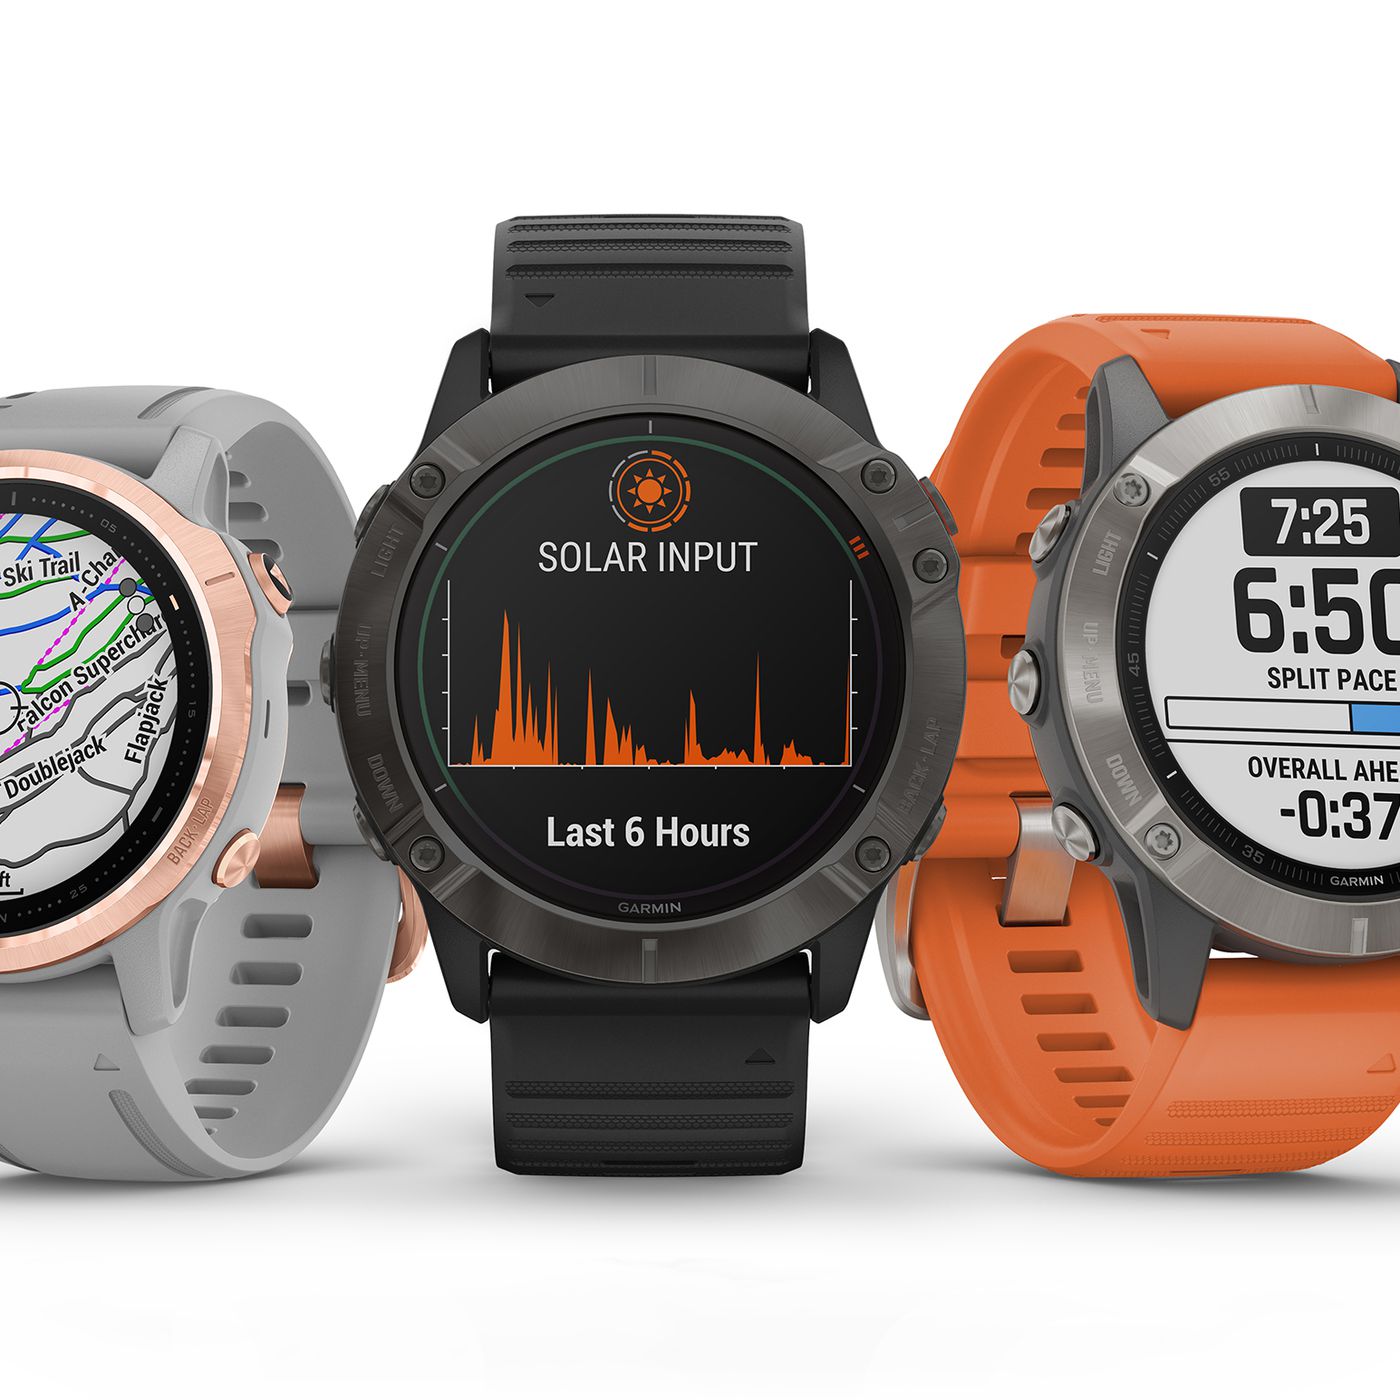 Garmin S New Fenix Gps Sport Watches Feature Solar Charging And